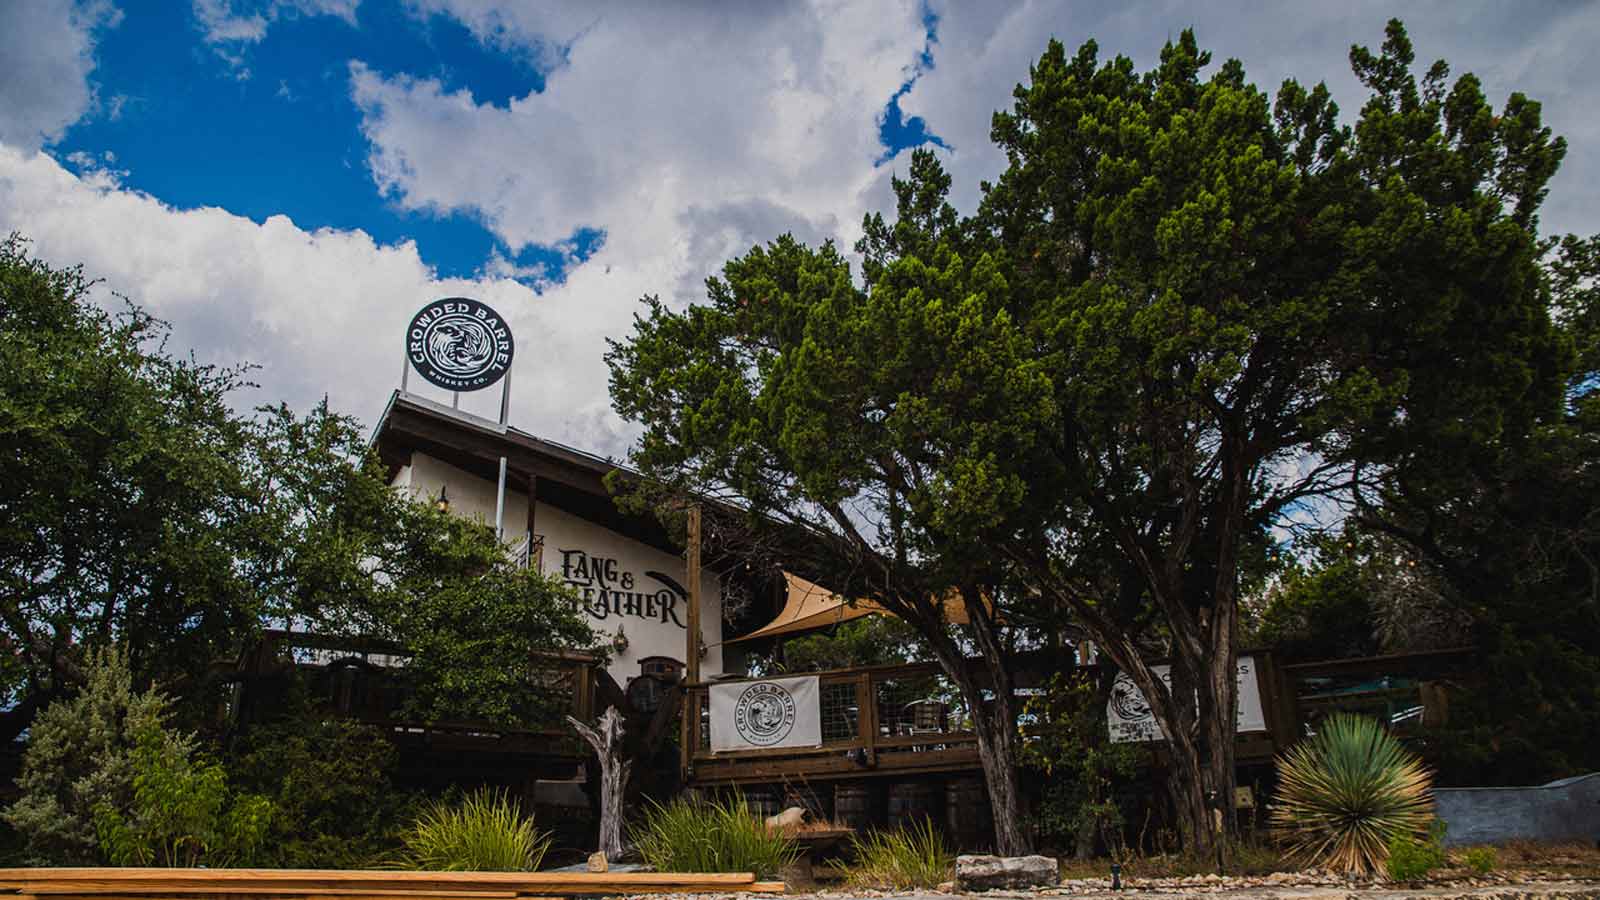 <p><strong>Address: 16221 Crystal Hills Dr Bldg D, Austin, TX 78737</strong></p><p><a href="https://crowdedbarrelwhiskey.com/" rel="nofollow noopener">Crowded Barrel Whisky Co</a> takes their distilling process very seriously, albeit humorously, by incorporating feedback from their fellow whiskey lovers “in all aspects of the whiskey creation from grain to glass.” Rex Williams and Daniel Whittington welcome whiskey “nerds” to their “Whisky Tribe.”</p><p>Their gothic-style tasting room, Fang and Feather, incorporates 2,000 square feet of outside deck space, allowing guests to enjoy their afternoon of whiskey wizardry while sipping on their aged cocktails. If you’re looking for a fantasy-inspired venue for a private event to rent, this might be the place for you.</p>